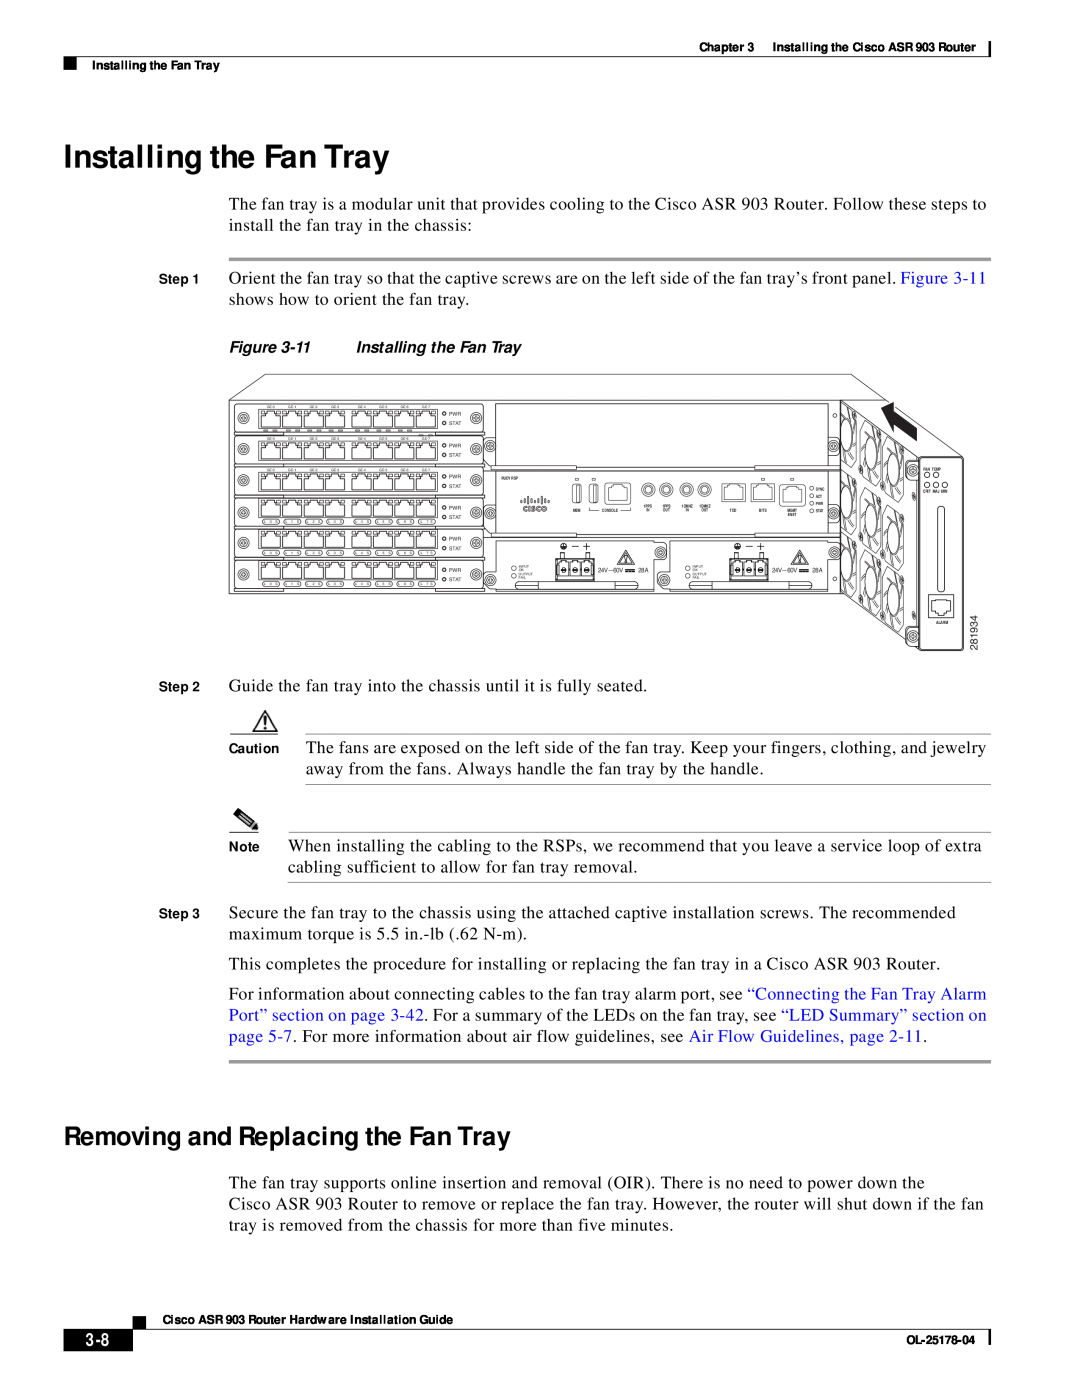 Cisco Systems ASR 903 manual Installing the Fan Tray, Removing and Replacing the Fan Tray 